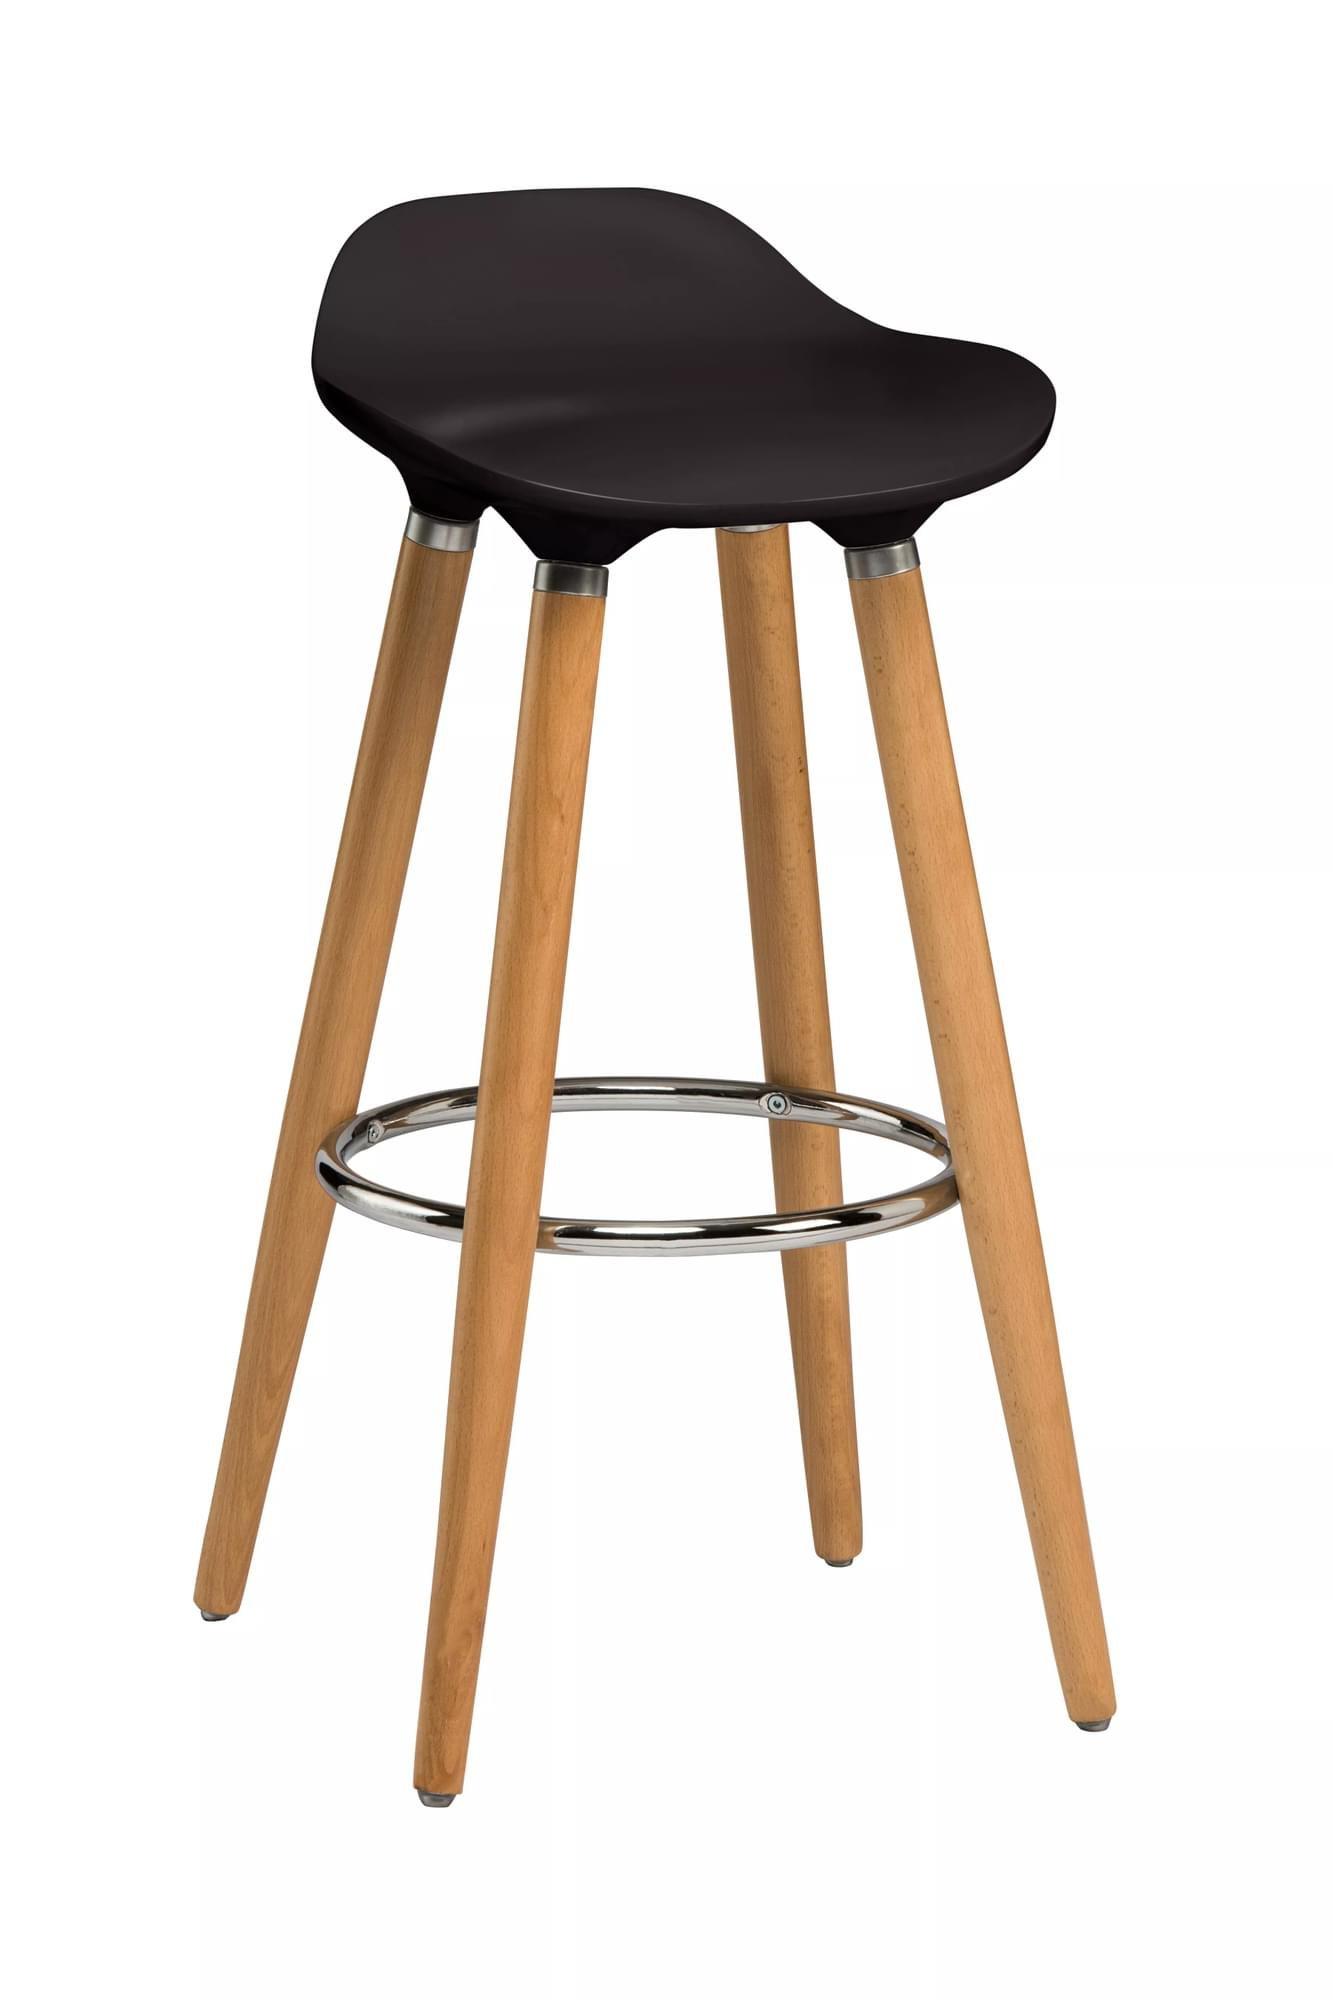 Interiors by Premier Black Abs Beech Wood Bar Stool, Easy to Clean Kitchen Bar Stool, Footrest Suppo